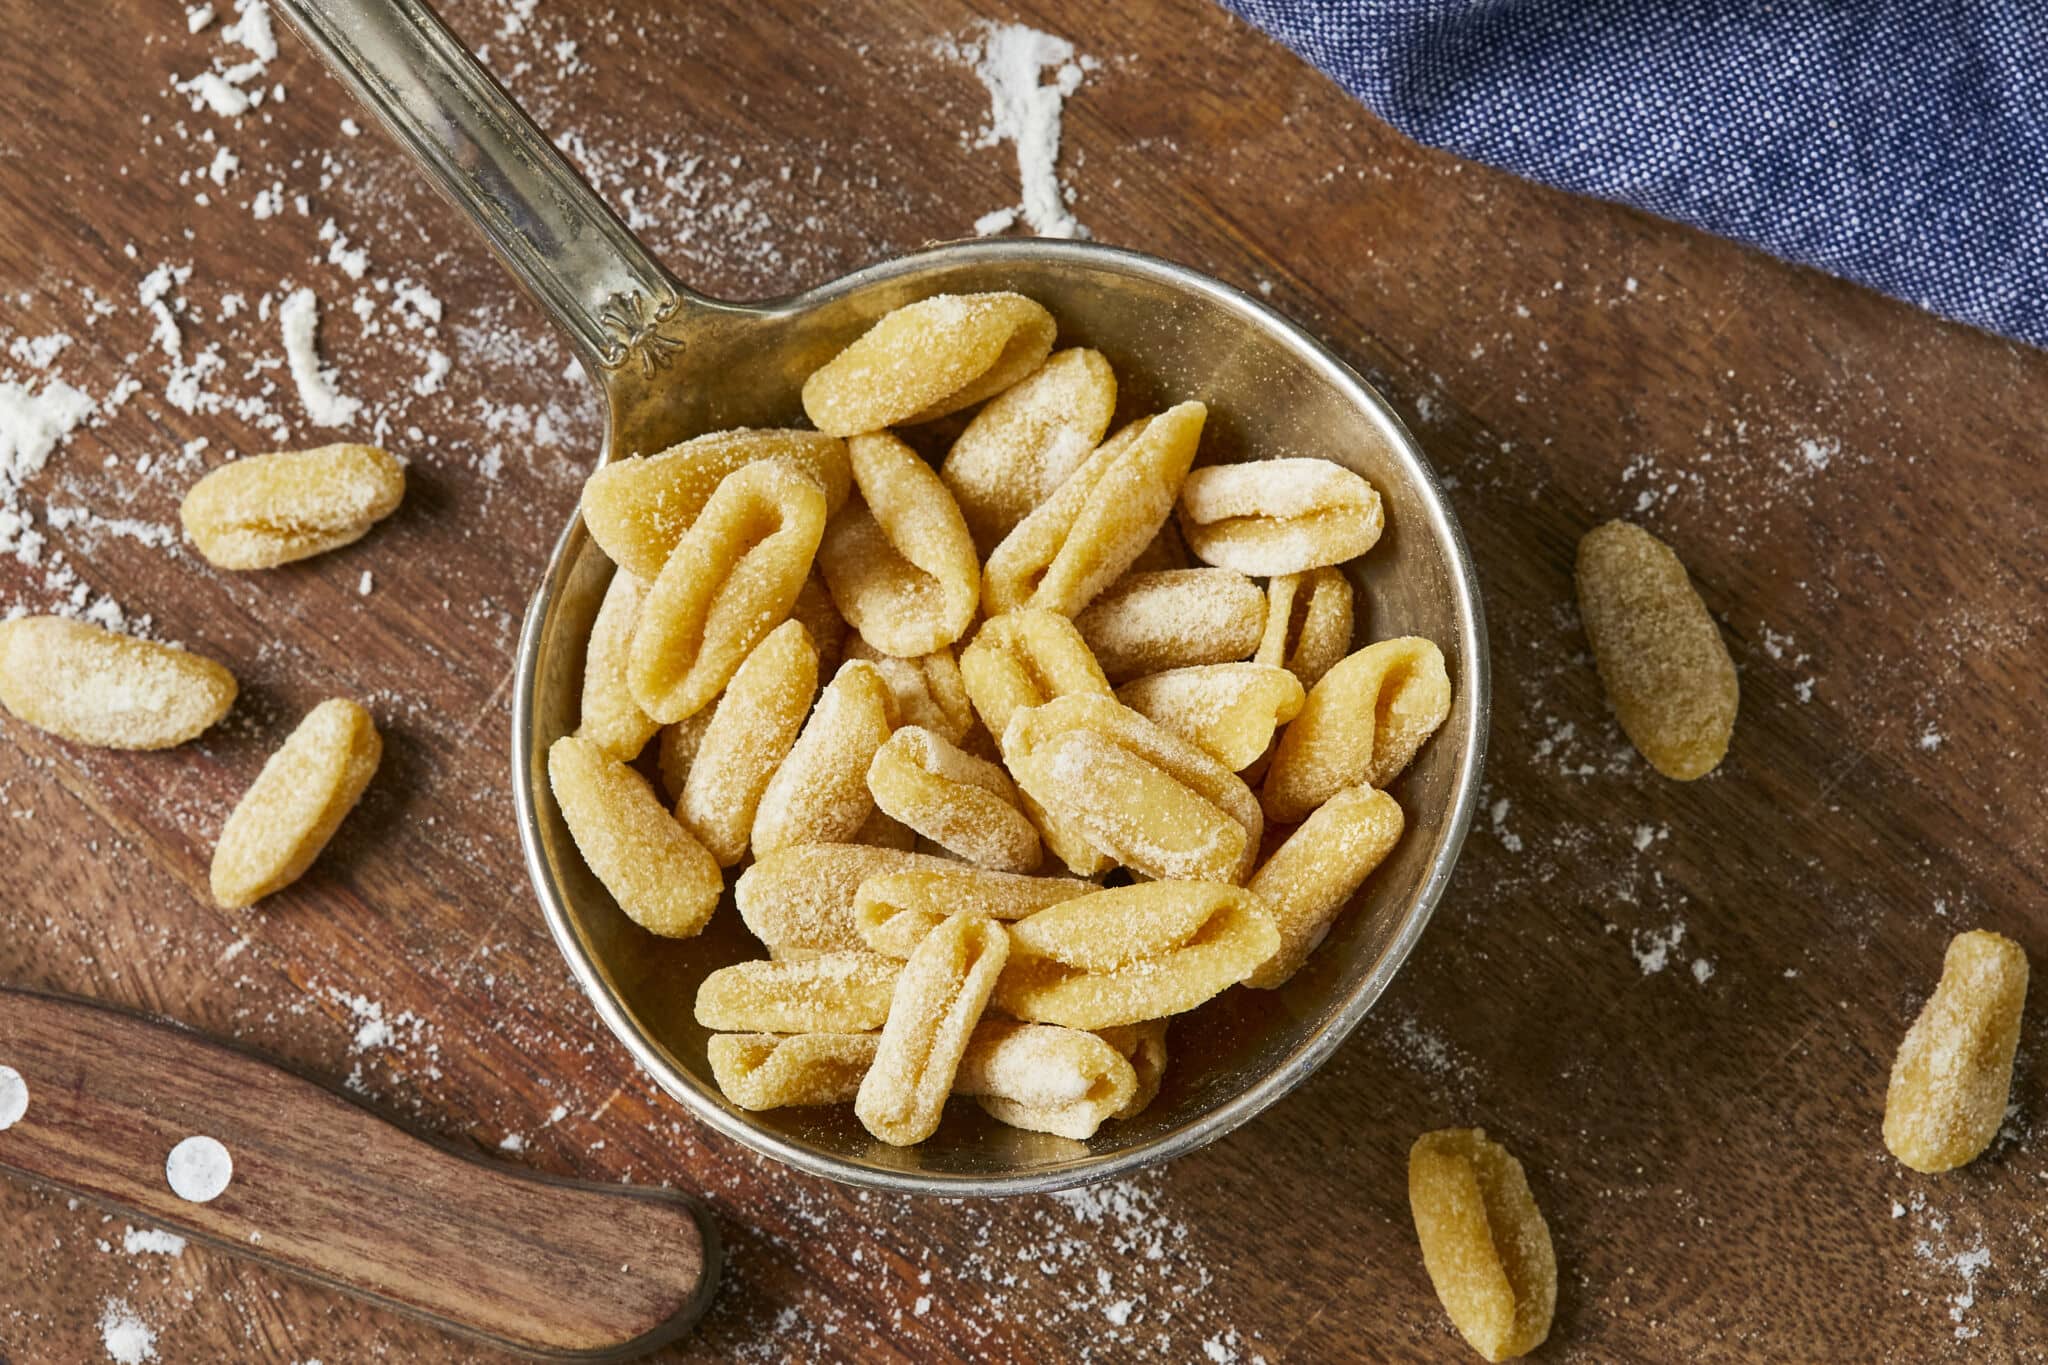 Cavatelli pasta is in a large metal ladle spoon. It has a curved shape of an elongated shell or a tiny hot dog bun! There are some extra pieces of cavtelli on the floured wooden board.